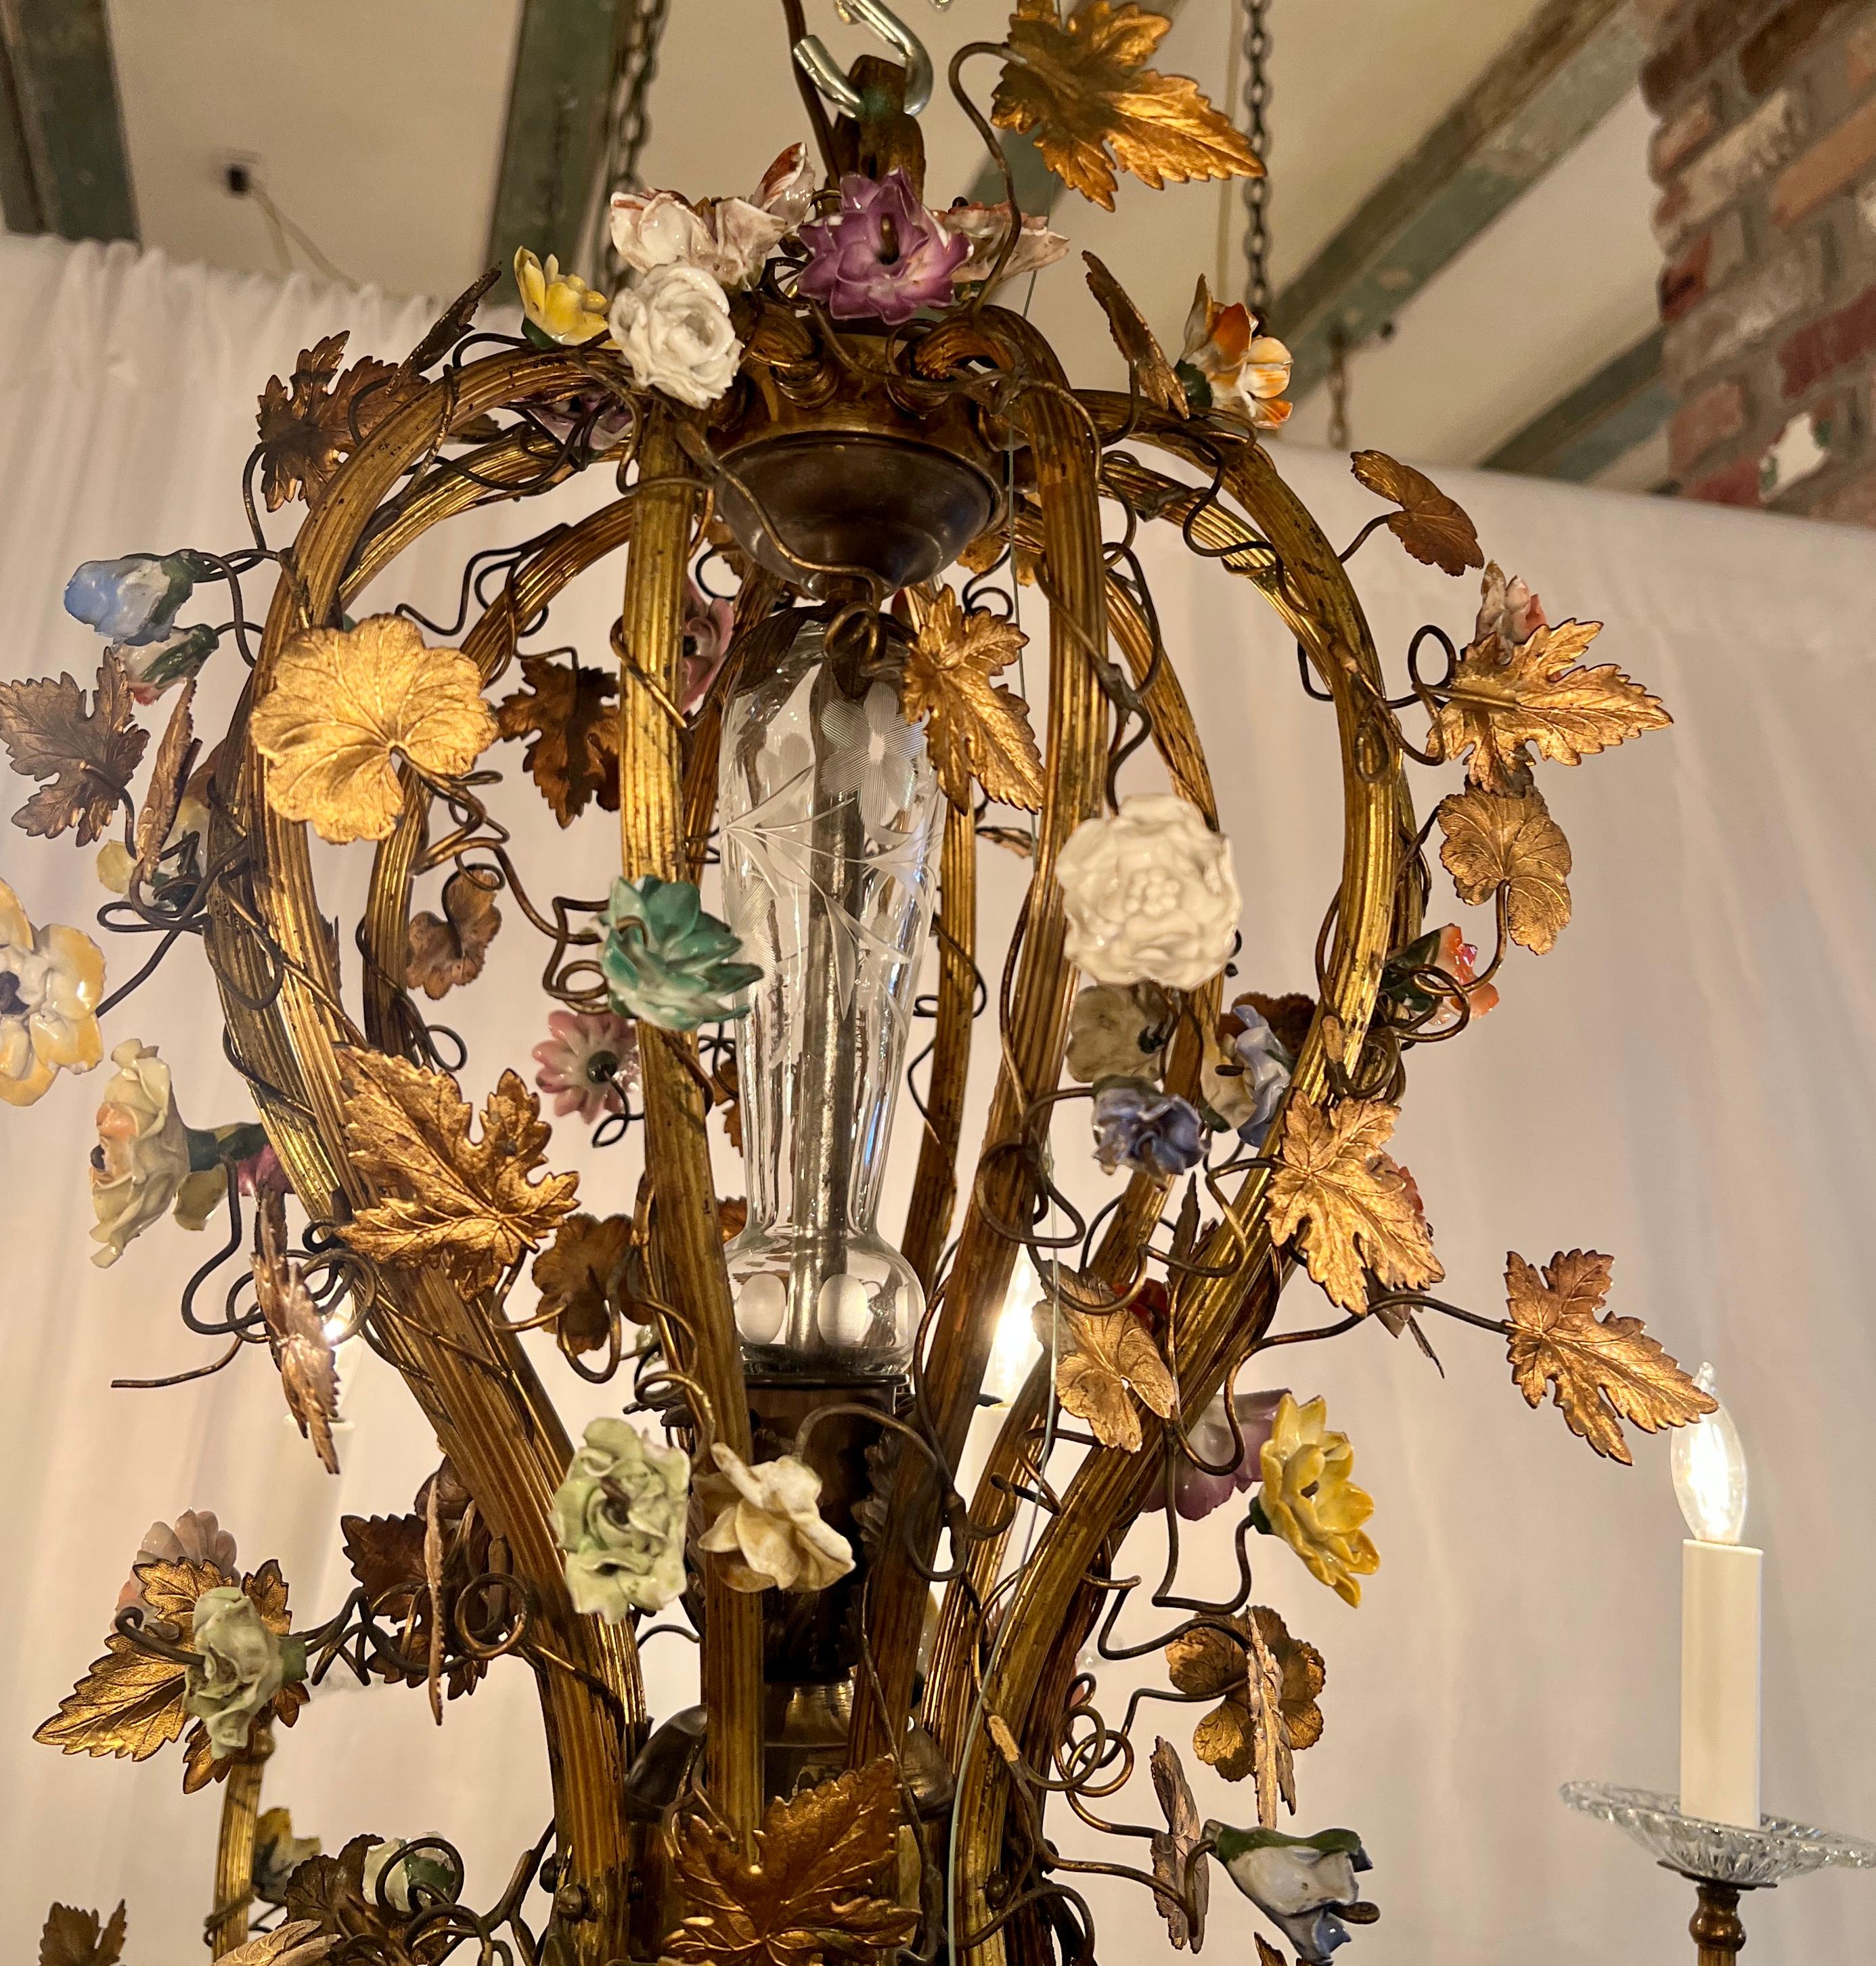 Antique French Gold Bronze and Cut Crystal Chandelier With Dresden Porcelain Flowers, Circa 1890.
10 Lights
